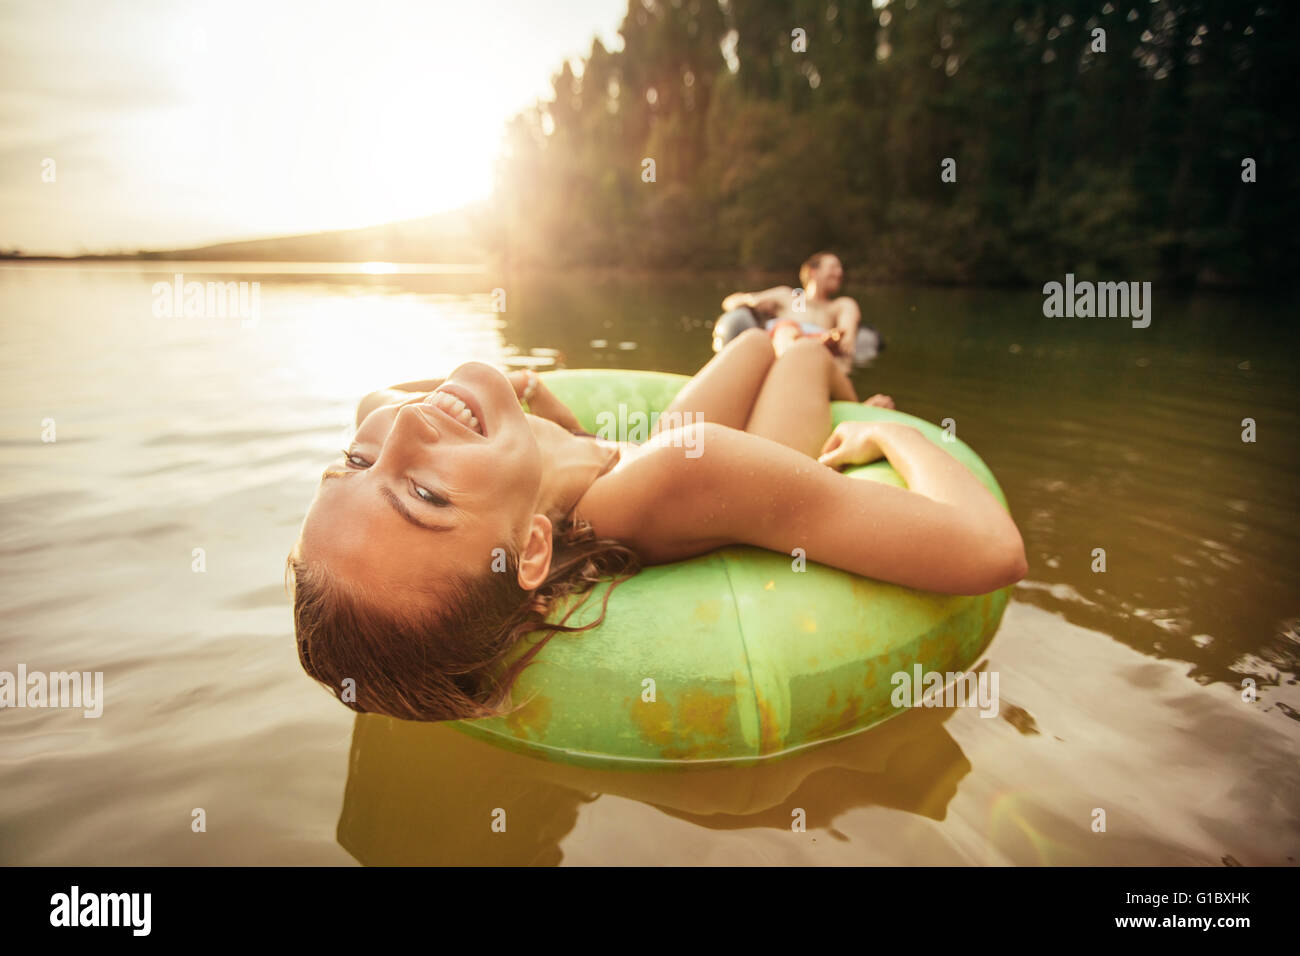 Closeup portrait of smiling young girl floating in an innertube with a man at the background in a lake. Young woman relaxing in Stock Photo